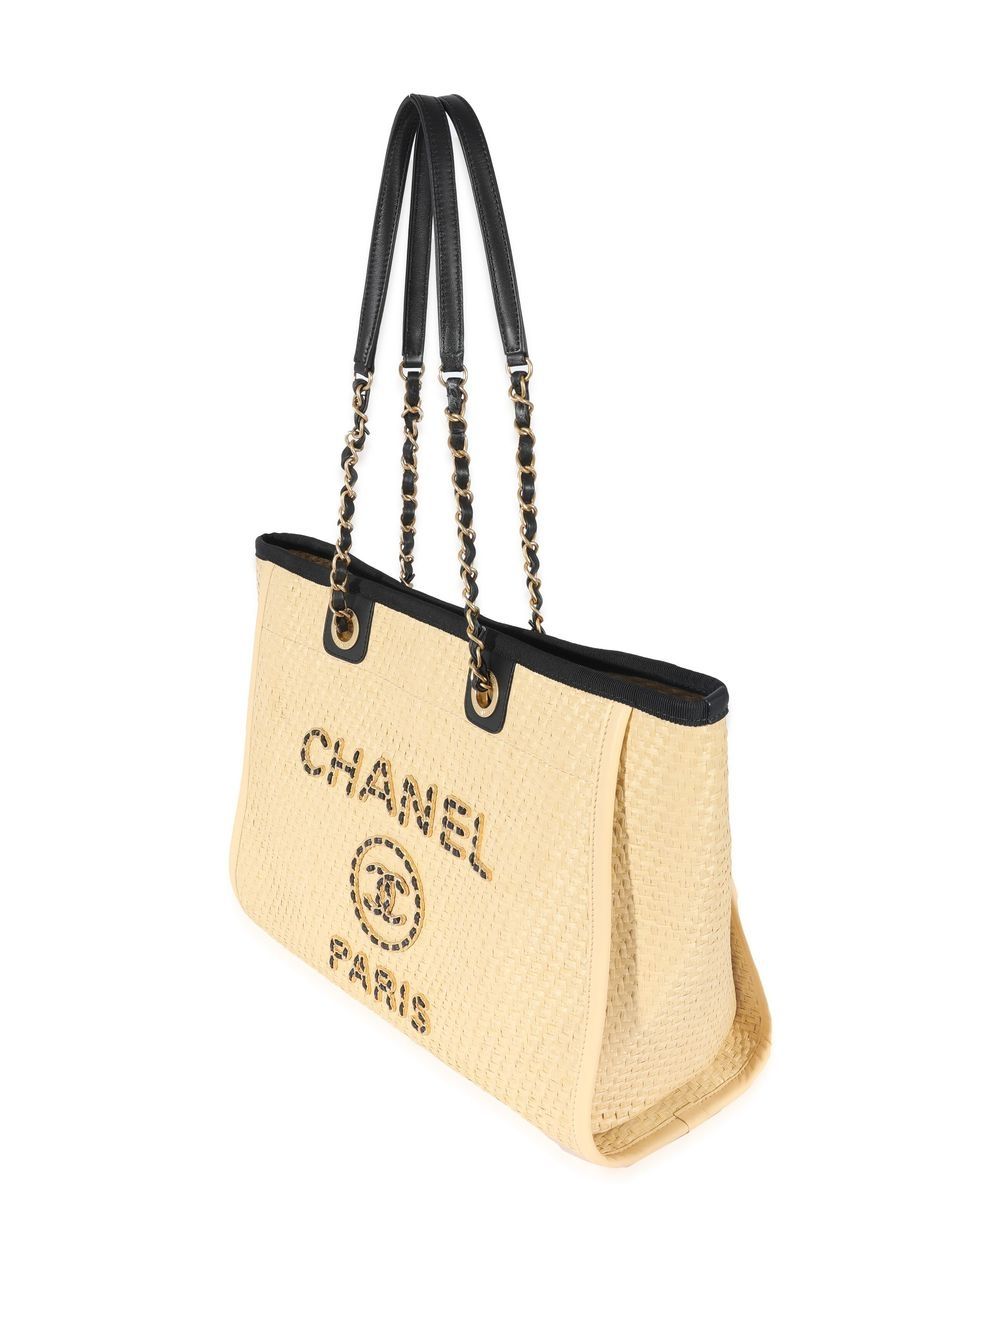 CHANEL Pre-Owned XL Deauville Tote Bag - Farfetch